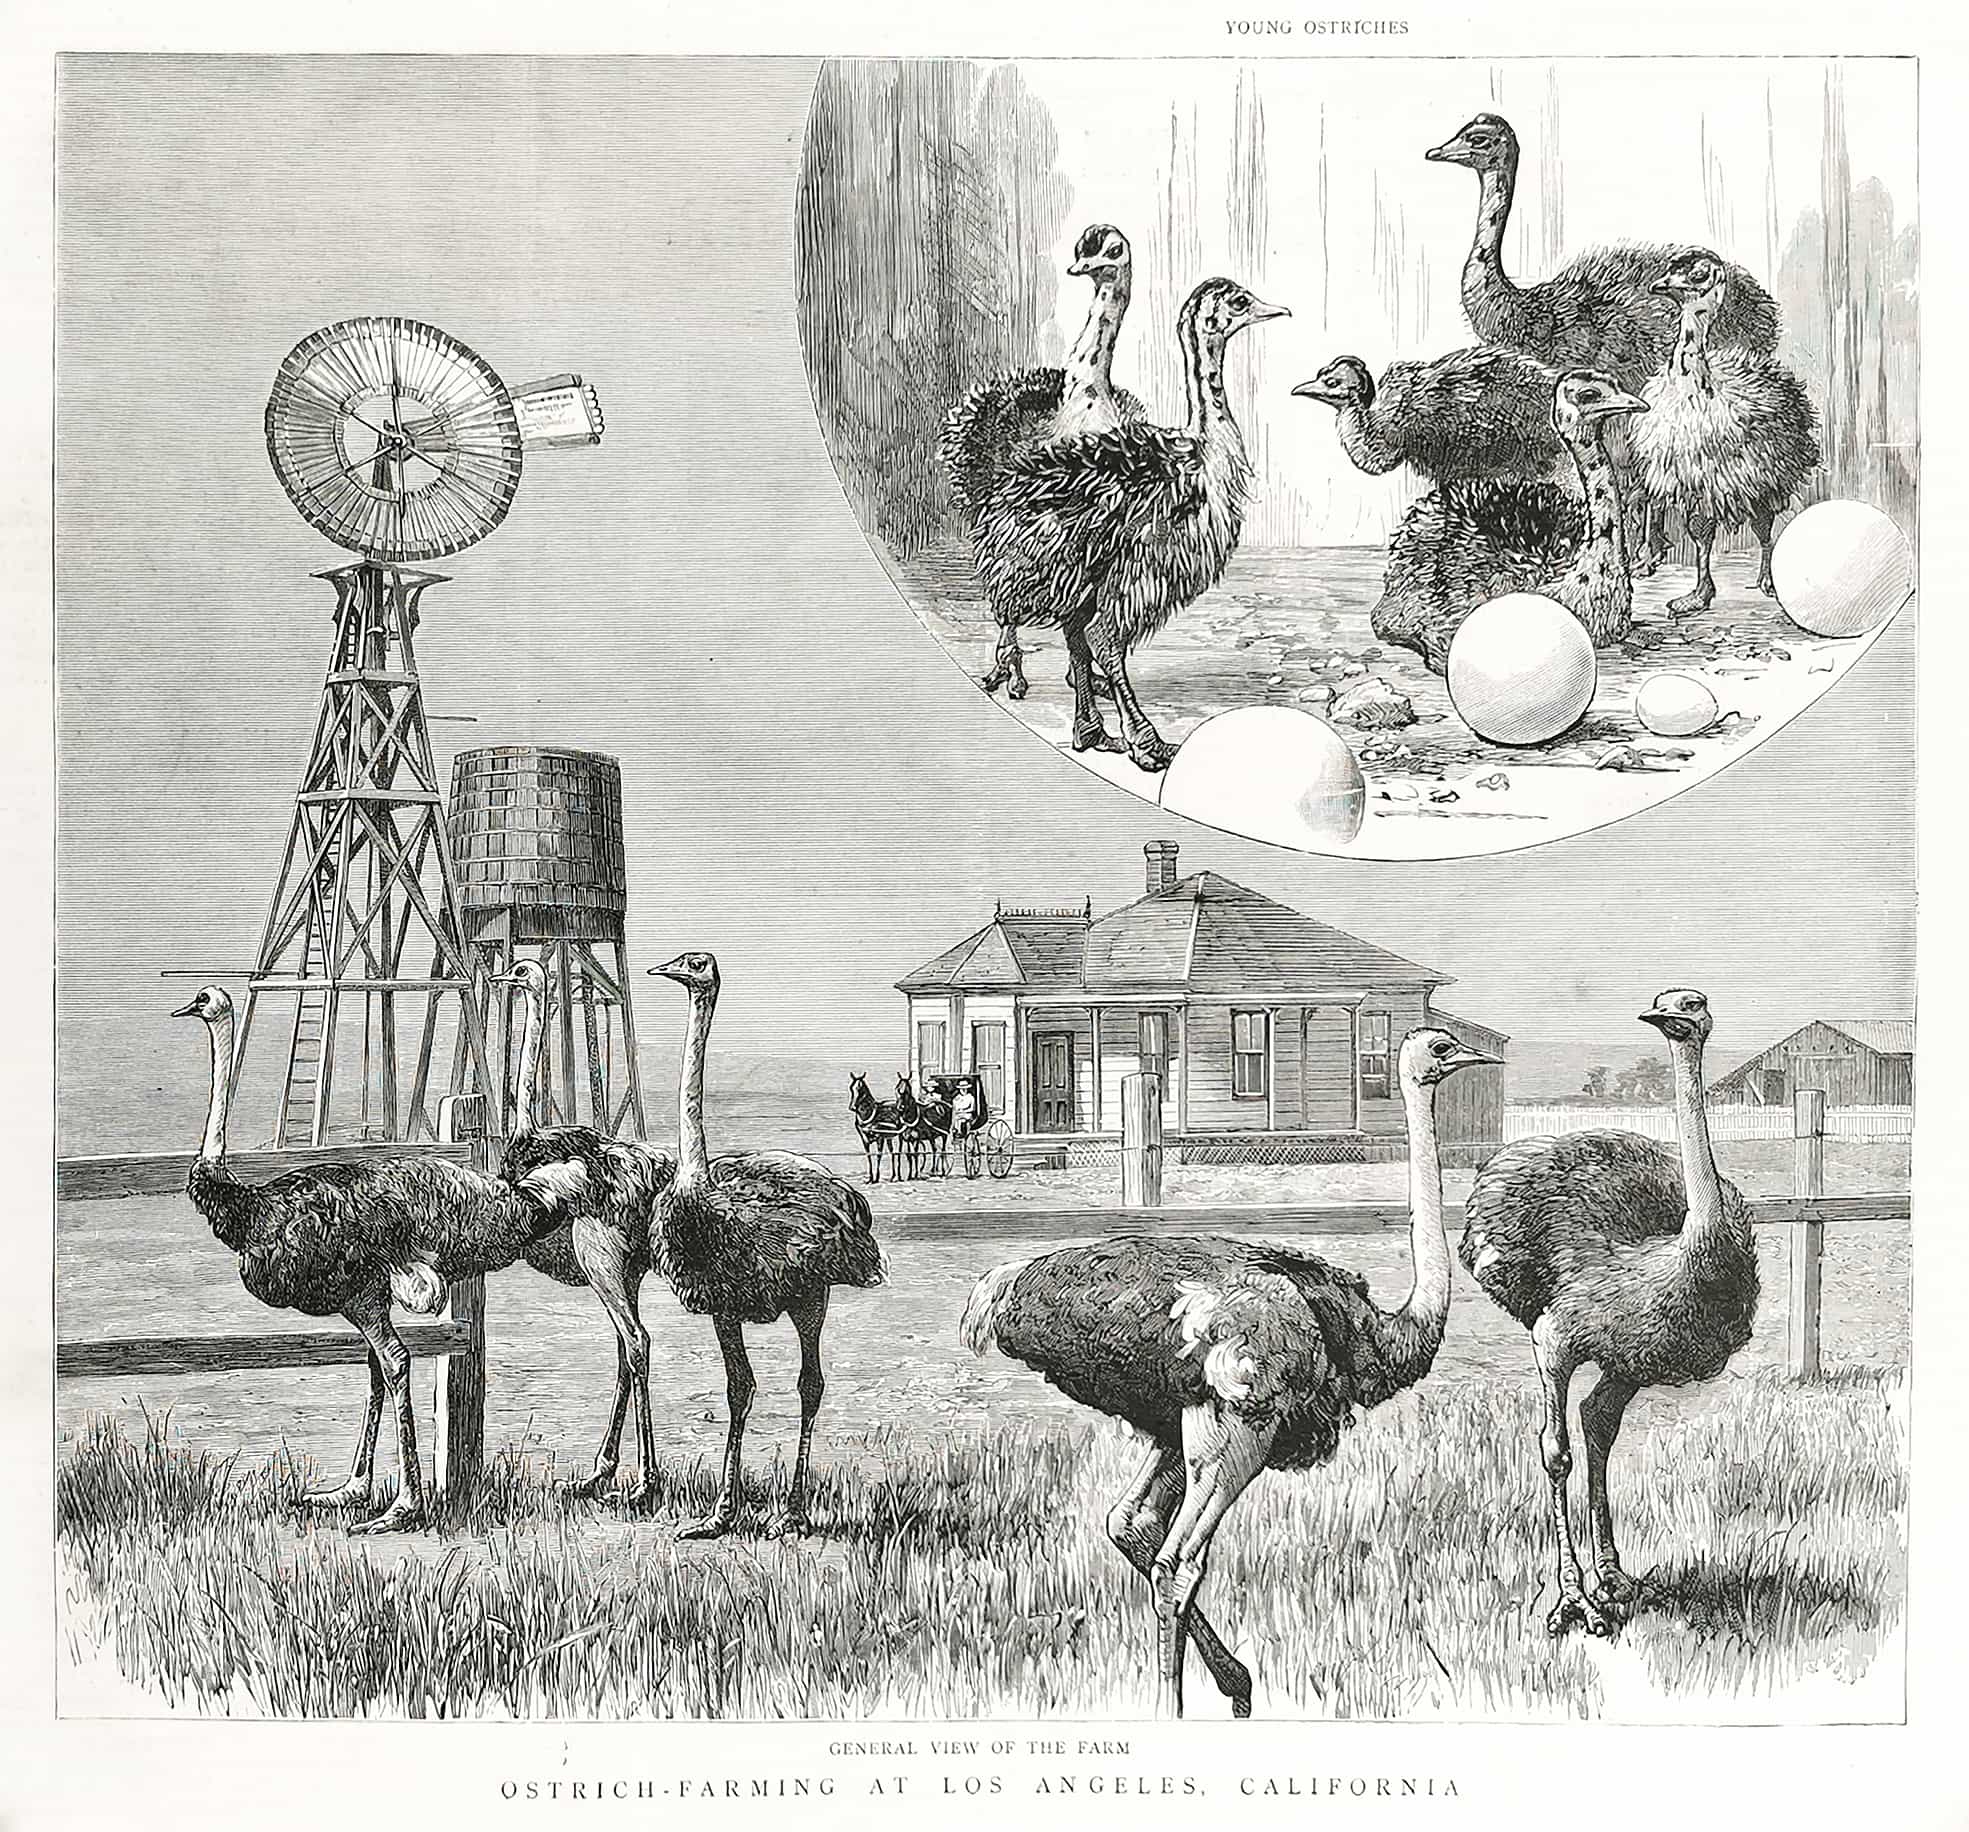 Ostrich-Farming at Los Angeles, California. - Antique Print from 1888